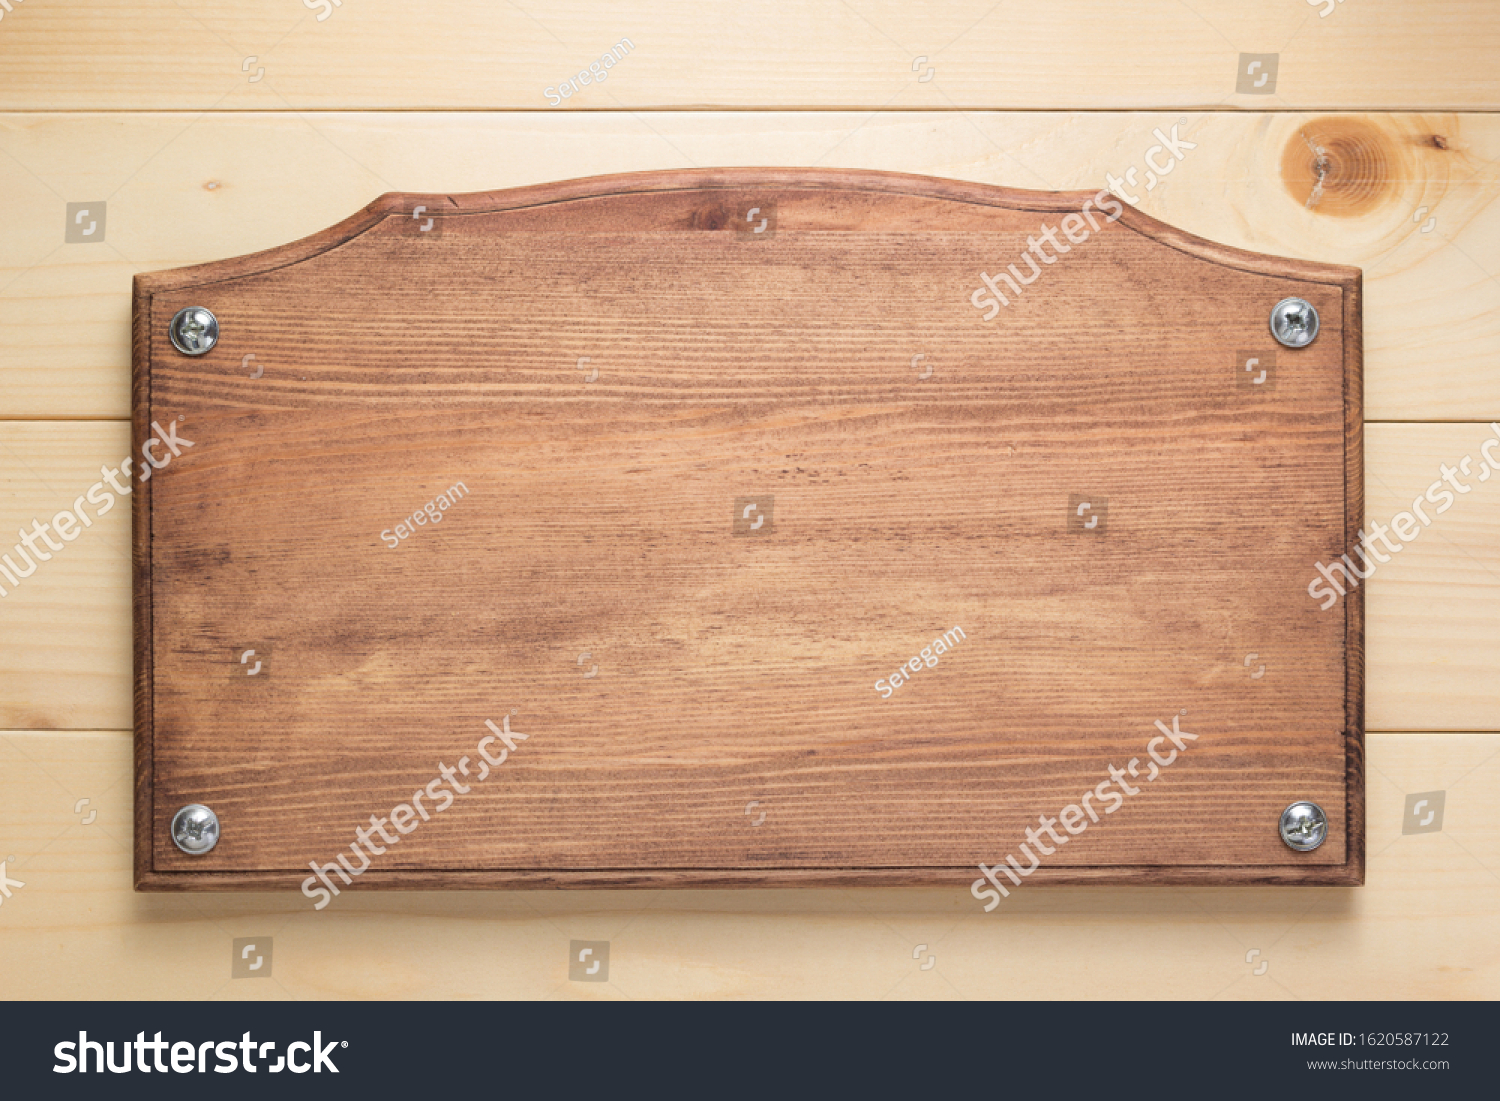 nameplate or wall sign at  wooden background texture surface, with screws #1620587122